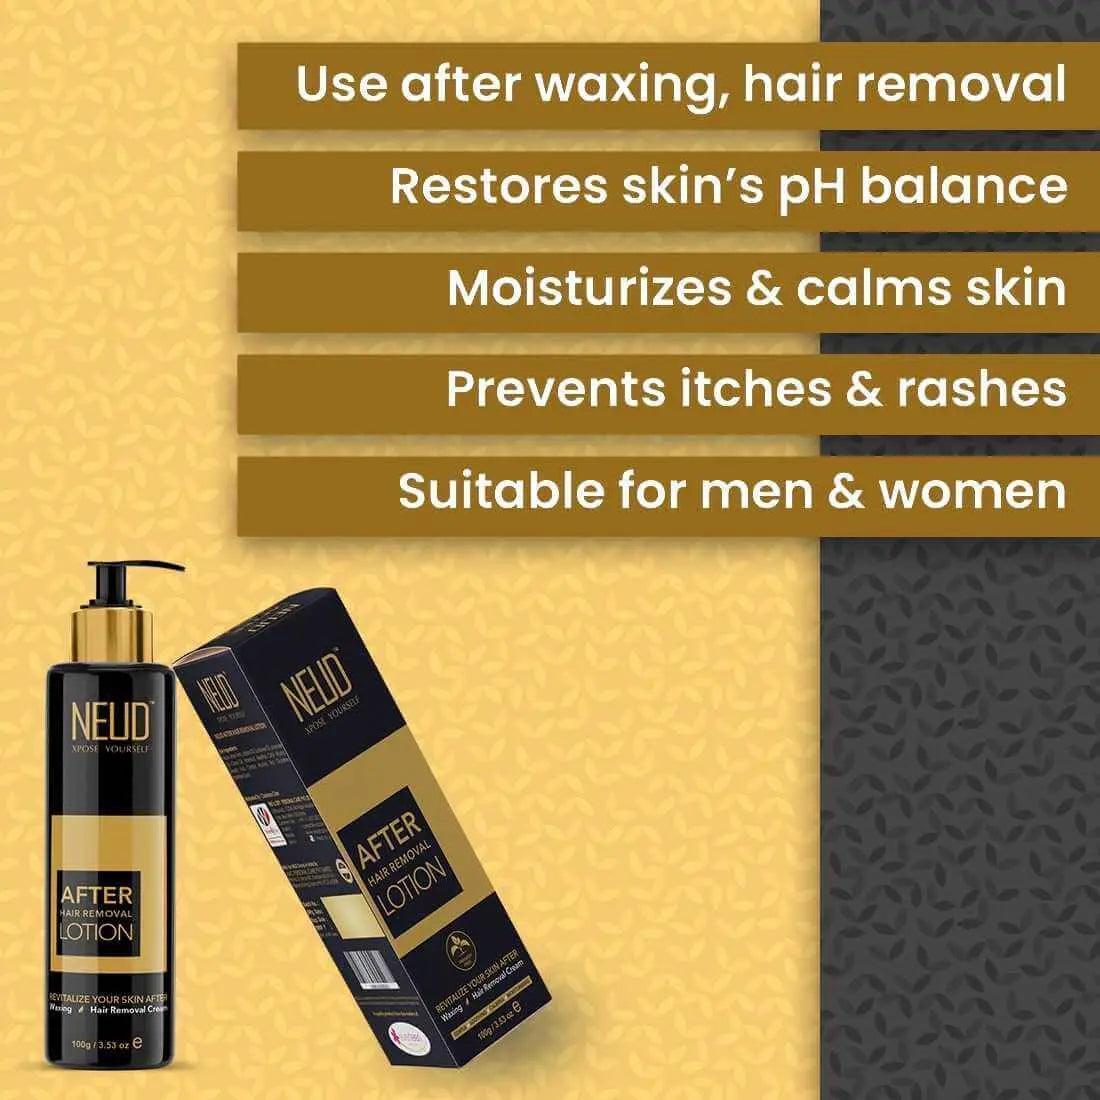 NEUD Combo: Natural Hair Inhibitor and After-Hair-Removal Skin Lotion for Men and Women 8903540011869